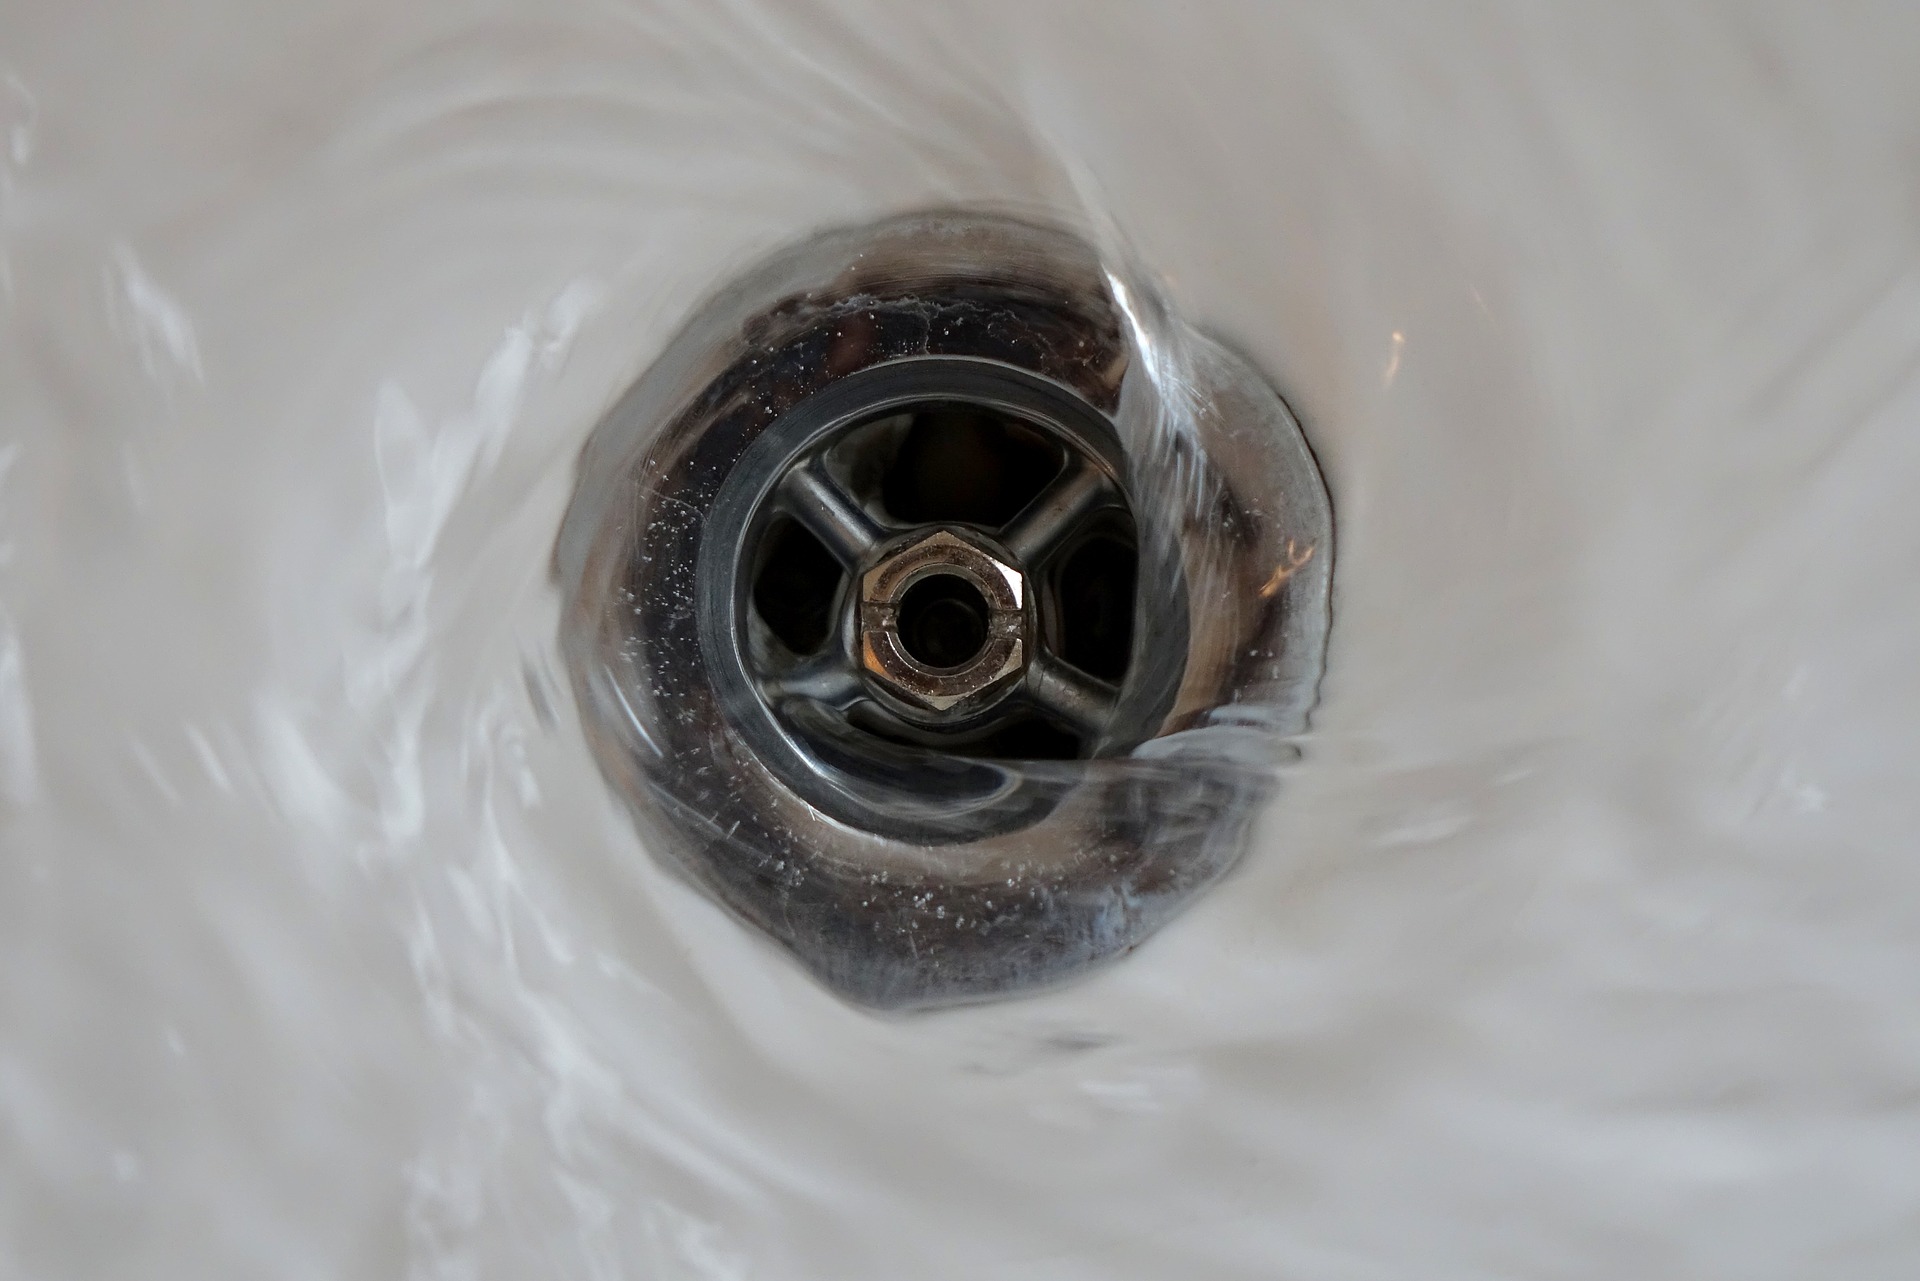 Water going down the drain of a bathroom sink